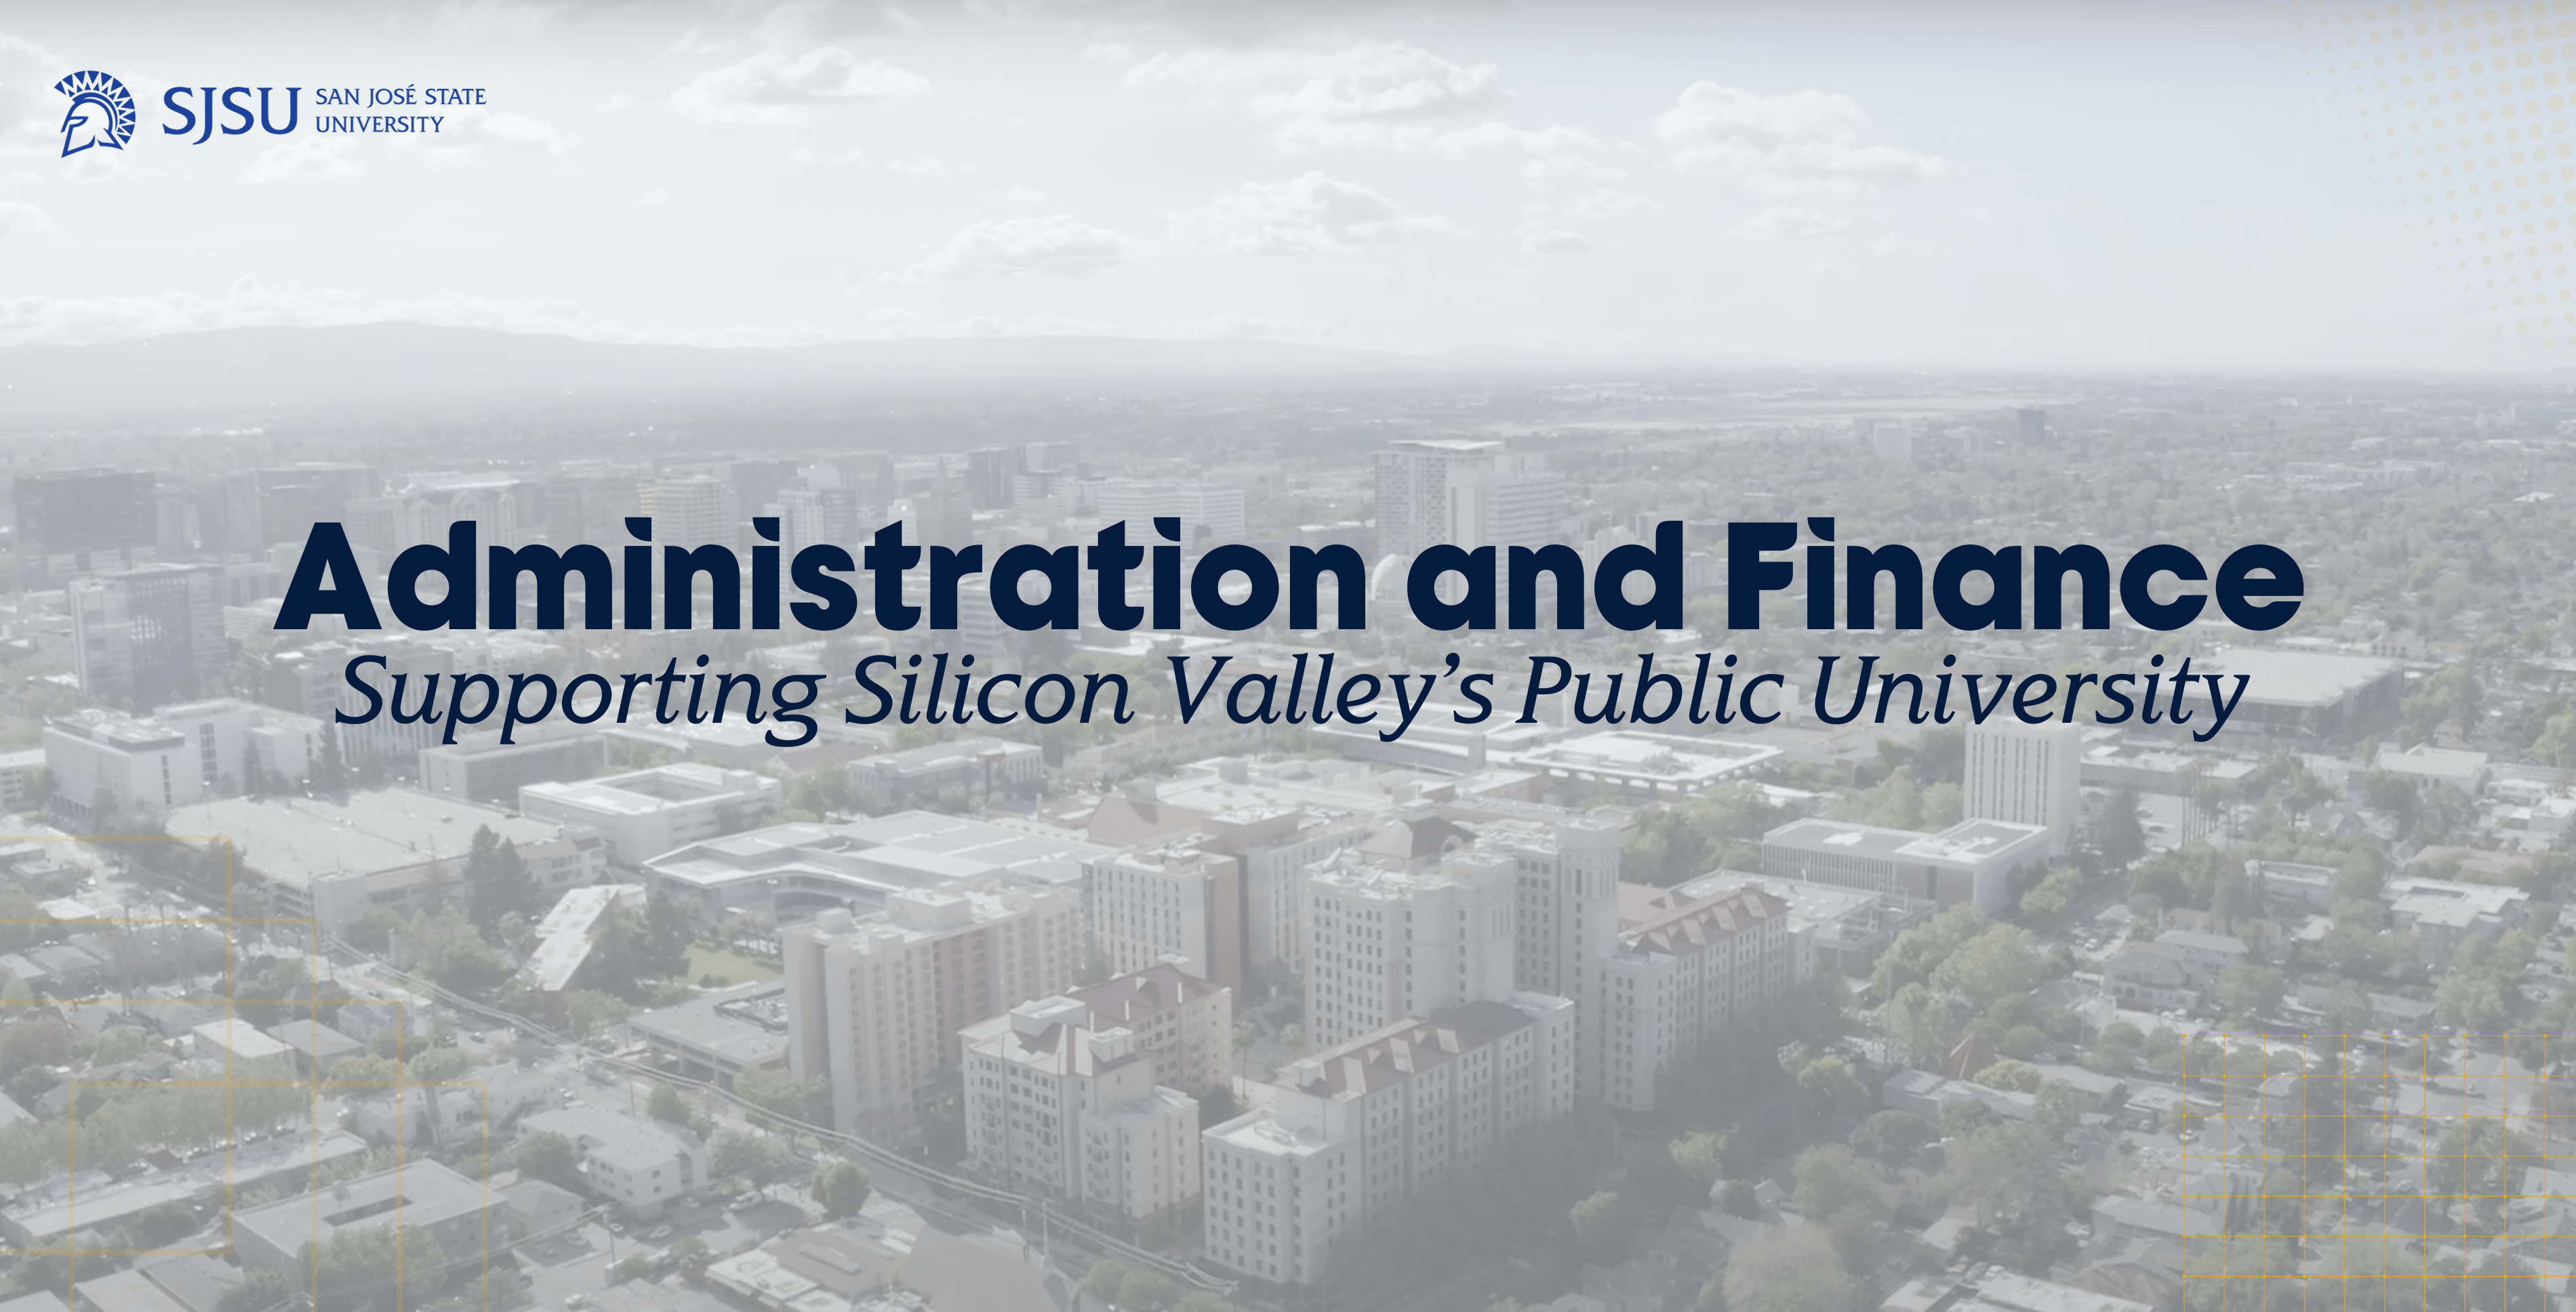 Administration and Finance: Supporting Silicon Valley's Public University